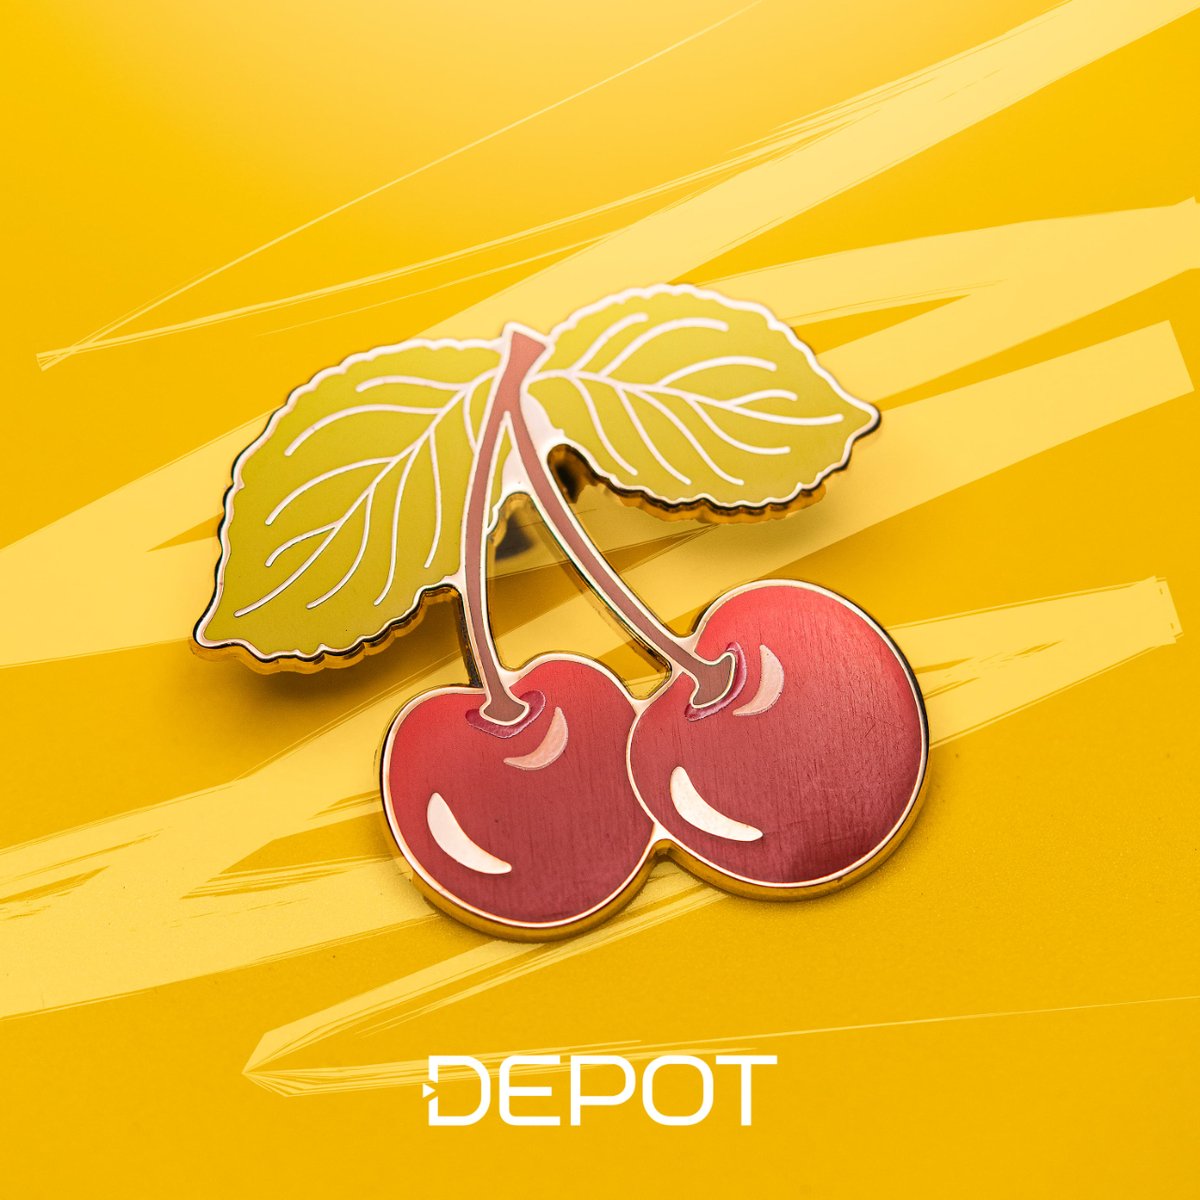 Show off your creative side and stand out with custom pins from Pin Depot. 🍒
.
.
.
#depot #pindepot #caricature #illustration #illustrator #patchesandpinexpo #sketch #draw #digitalart #merch #merchandise #bandmerch #fanart #deviantart